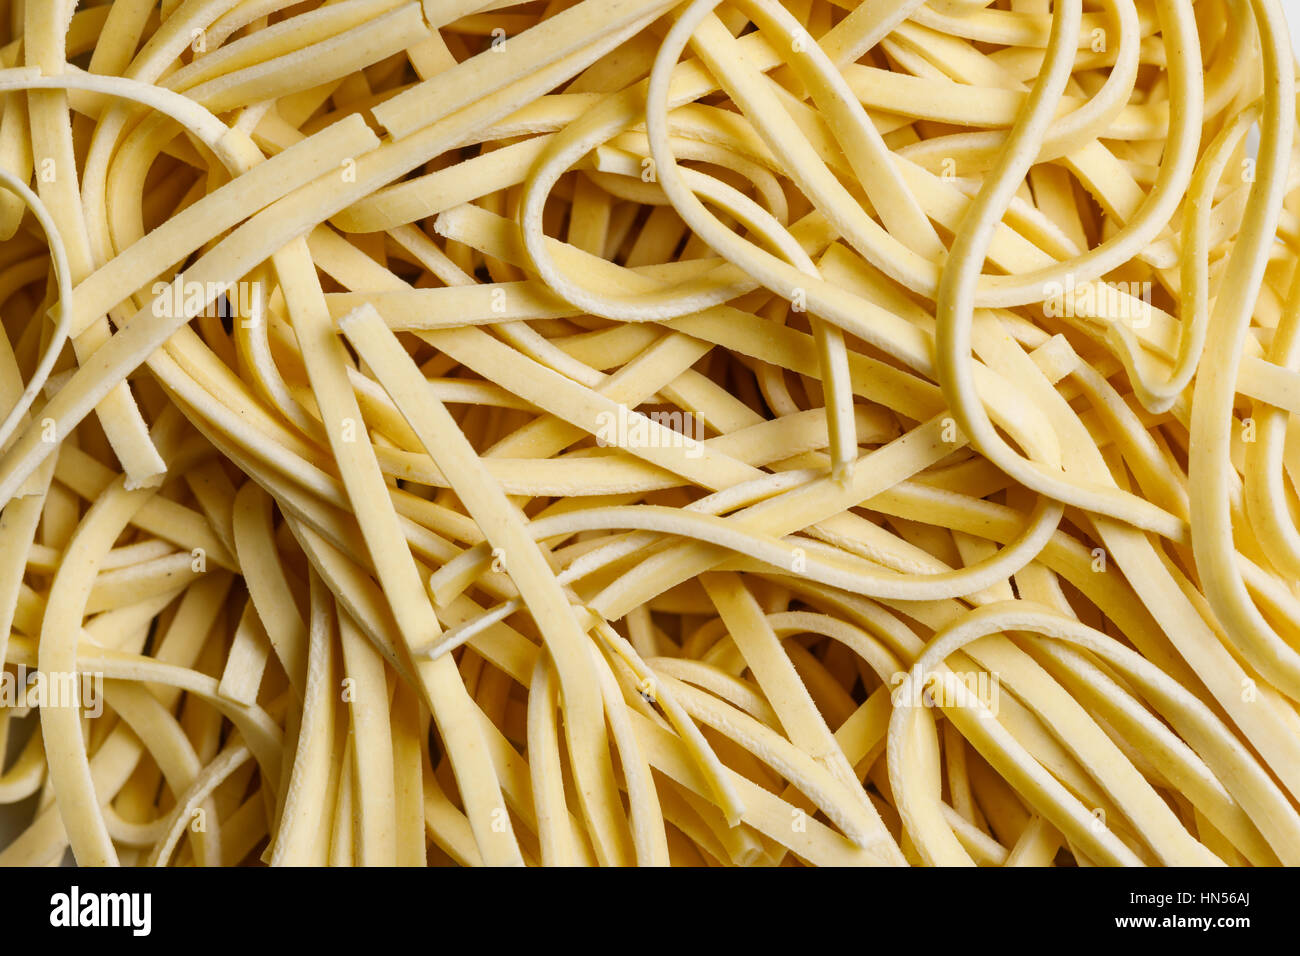 noodles raw food ingredient texture macro close up detailed Stock Photo